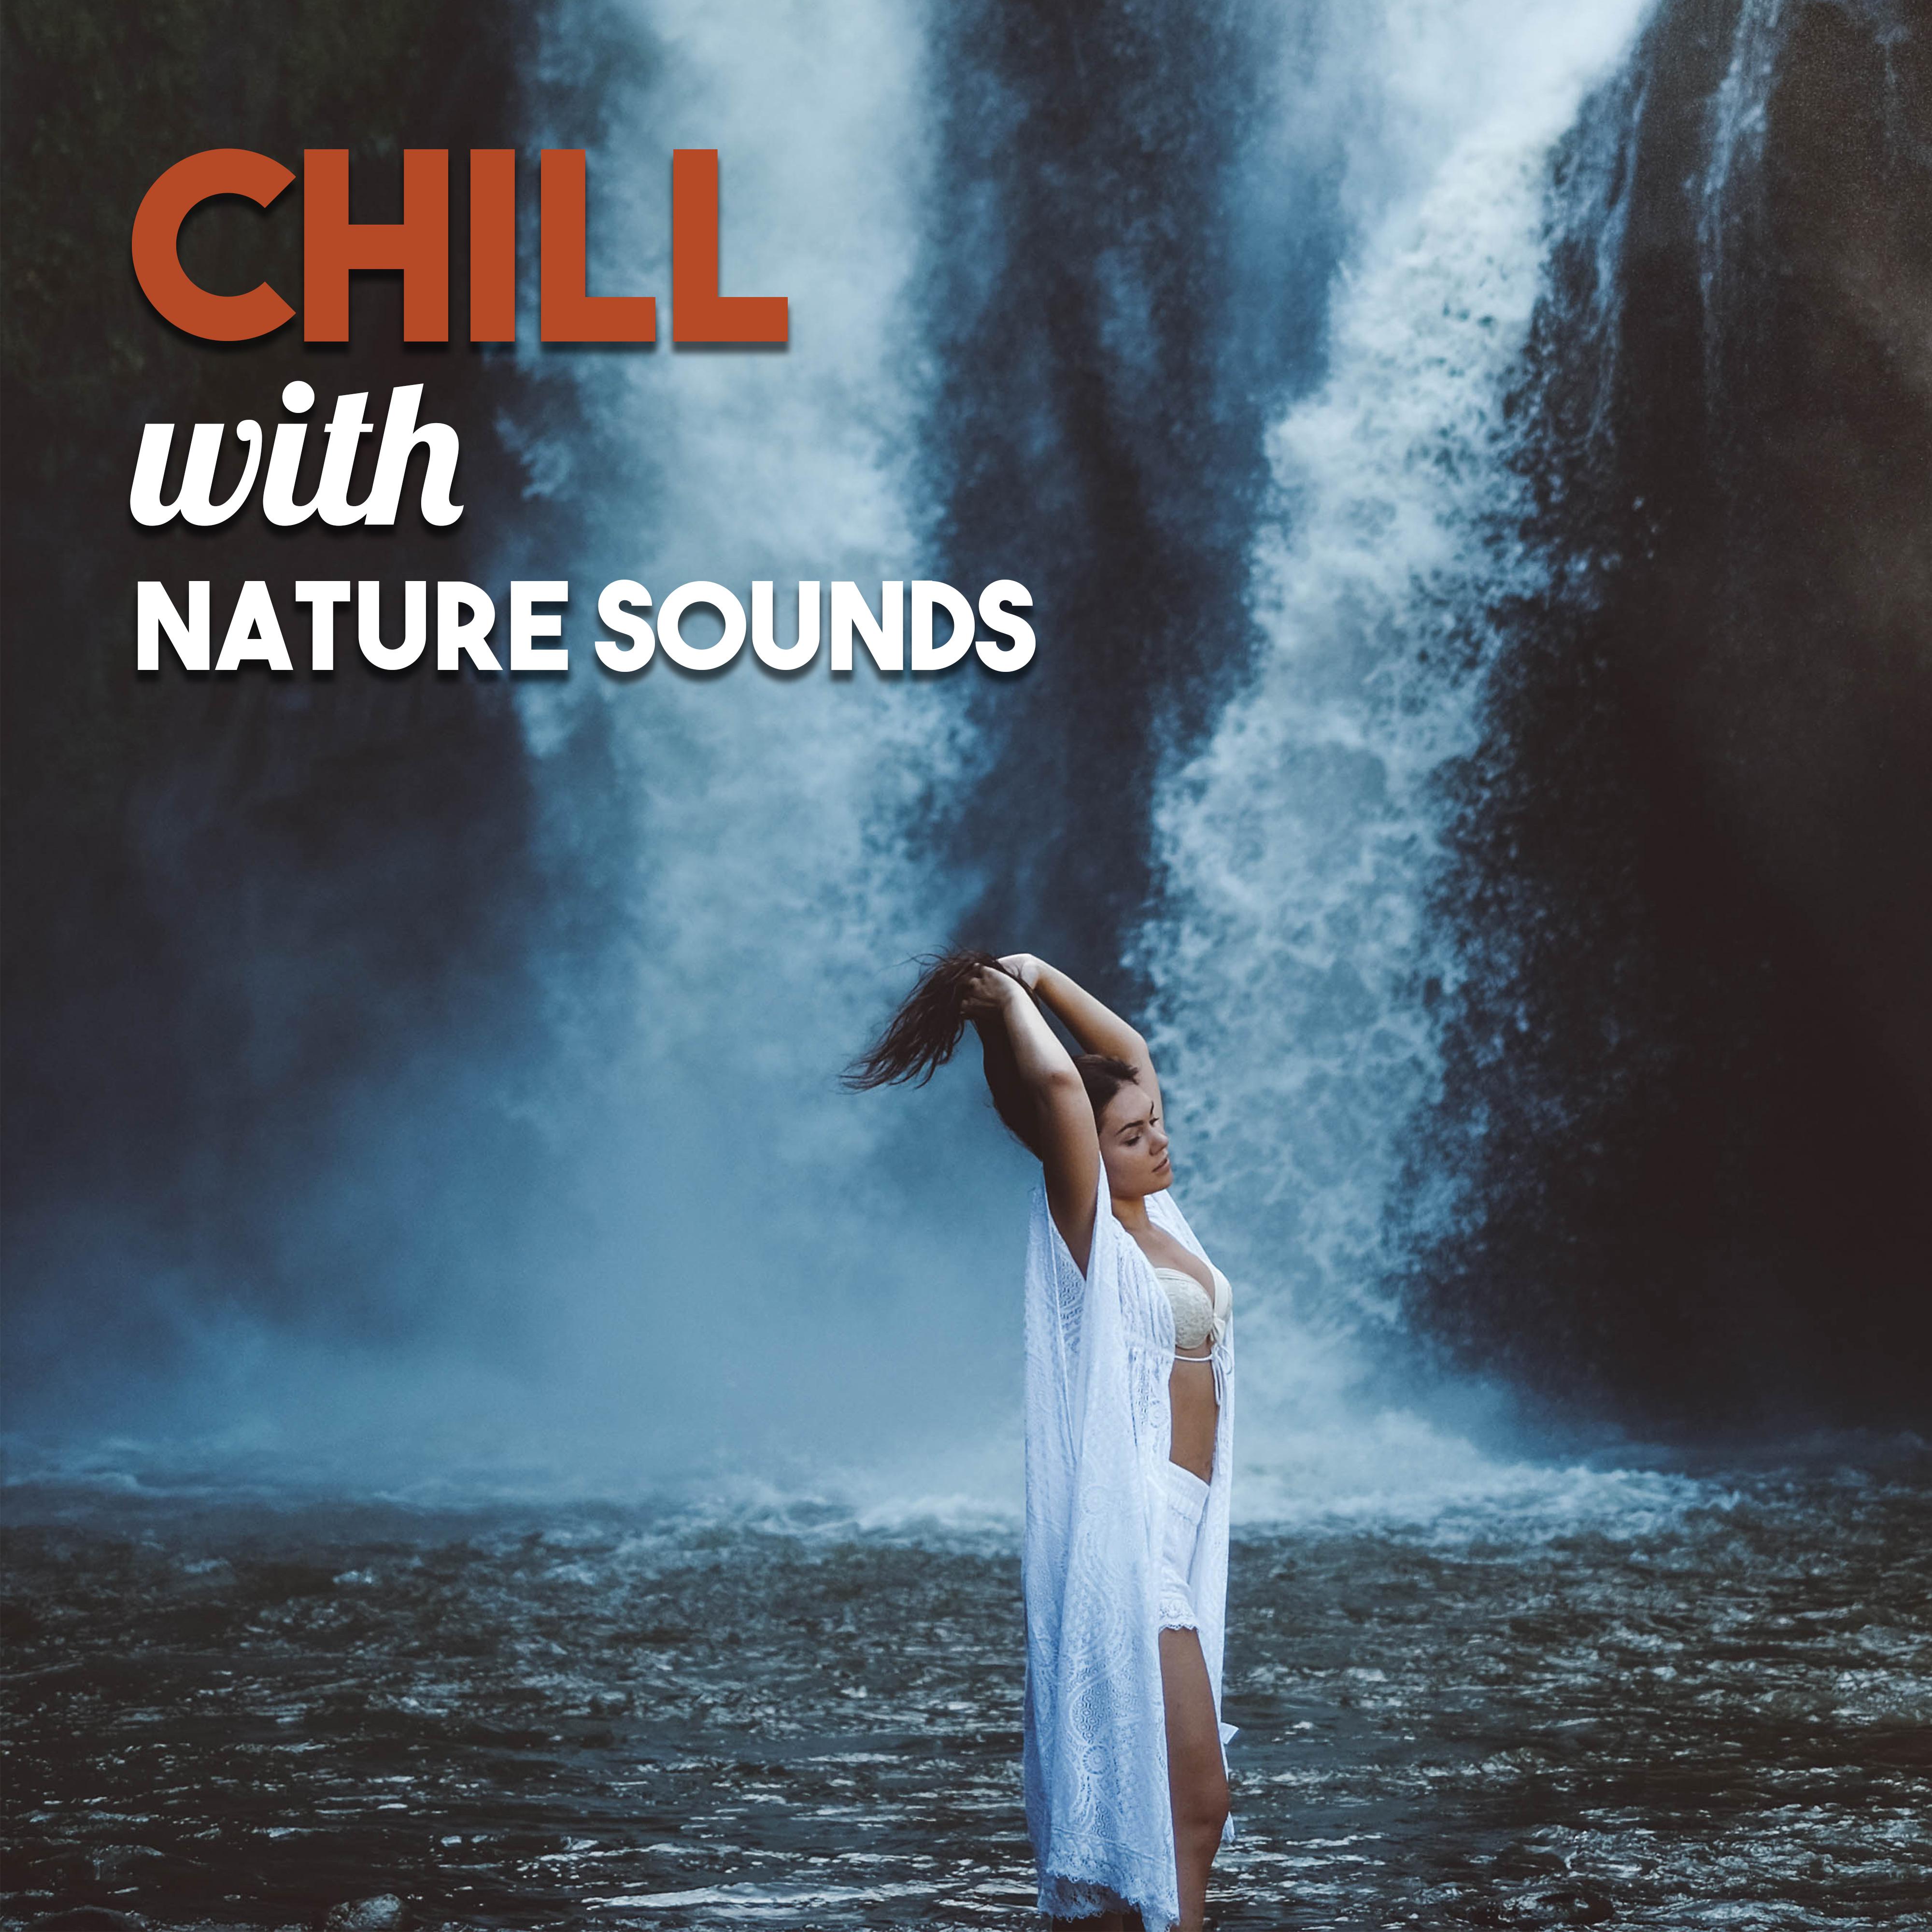 Chill with Nature Sounds  Relax Under Palms, Deep Meditation, Holiday, Relief, Summertime, Best Chillout Music to Rest